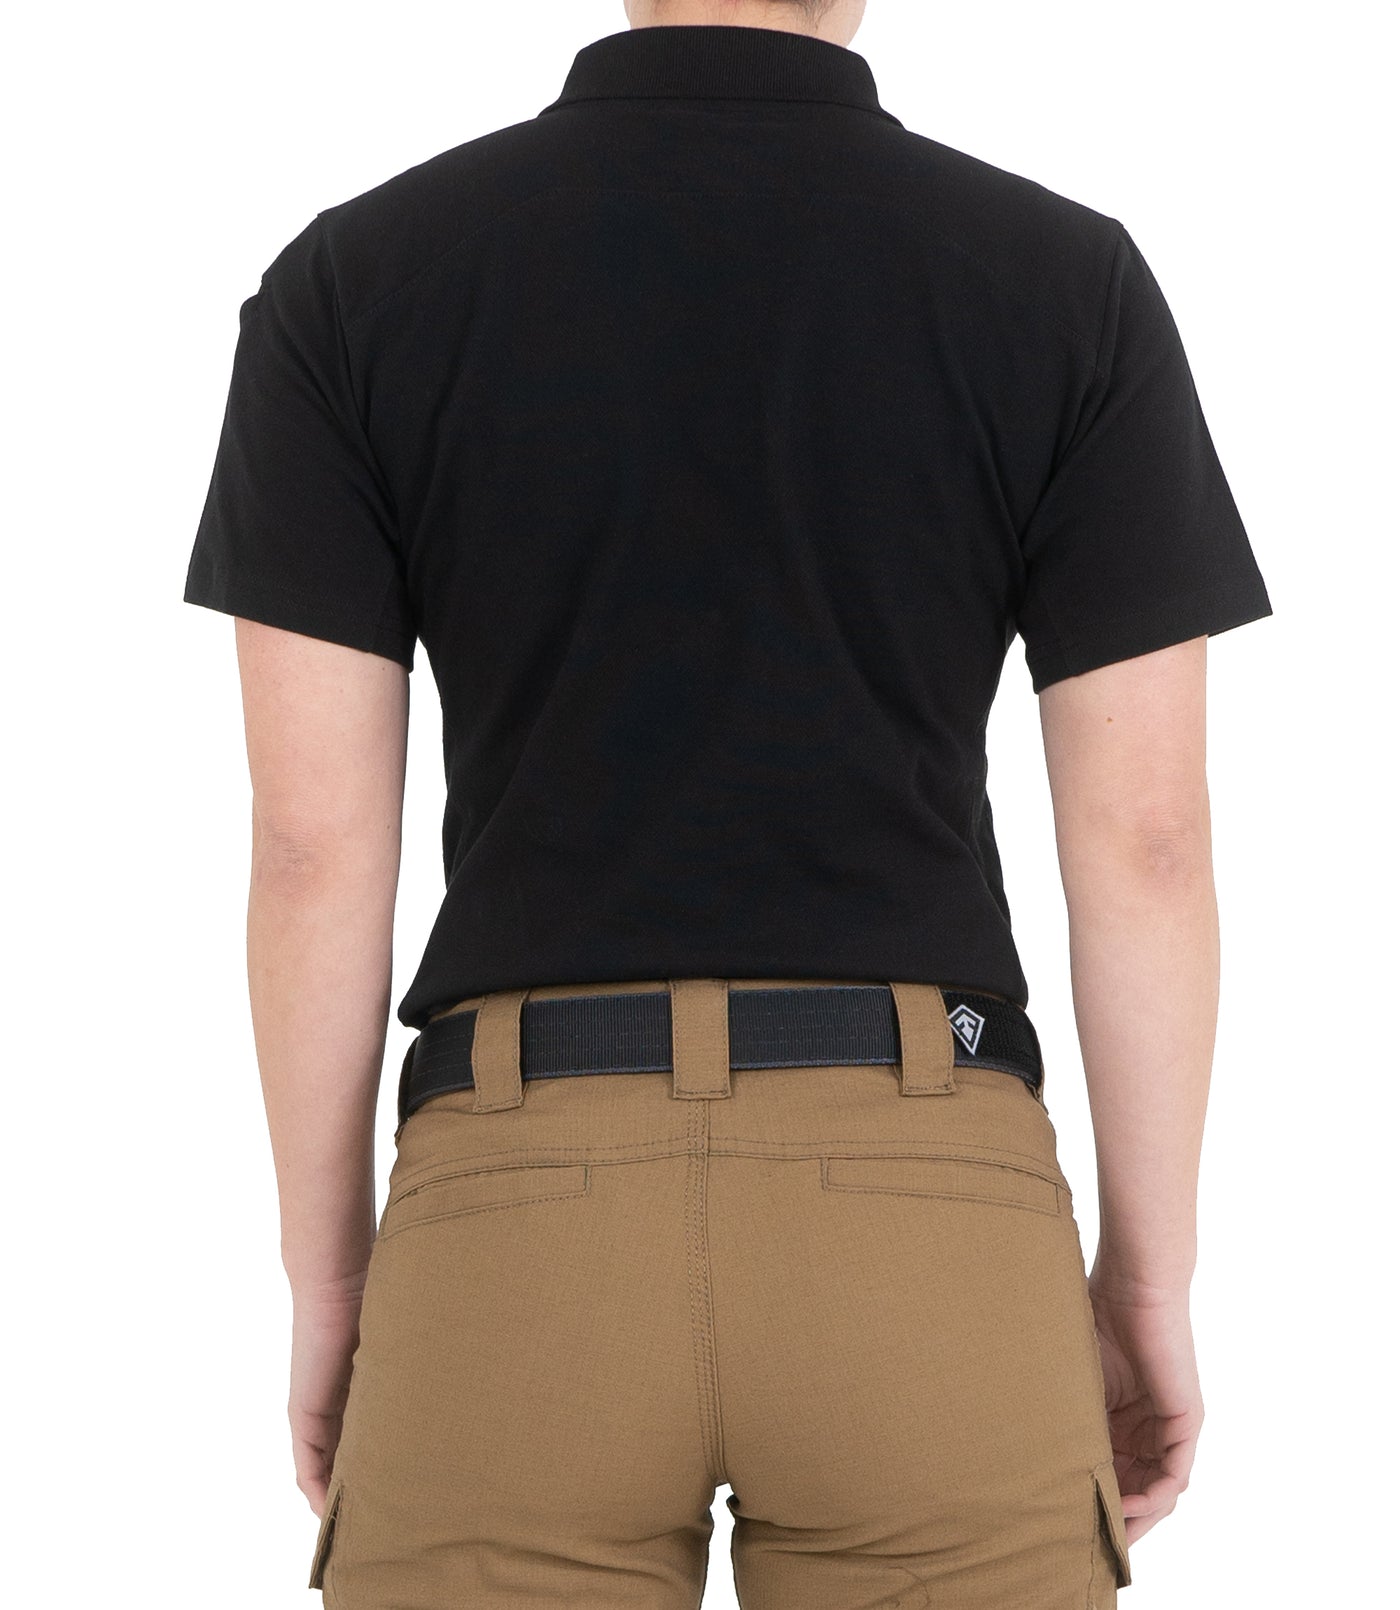 Back of Women's Cotton Short Sleeve Polo in Black